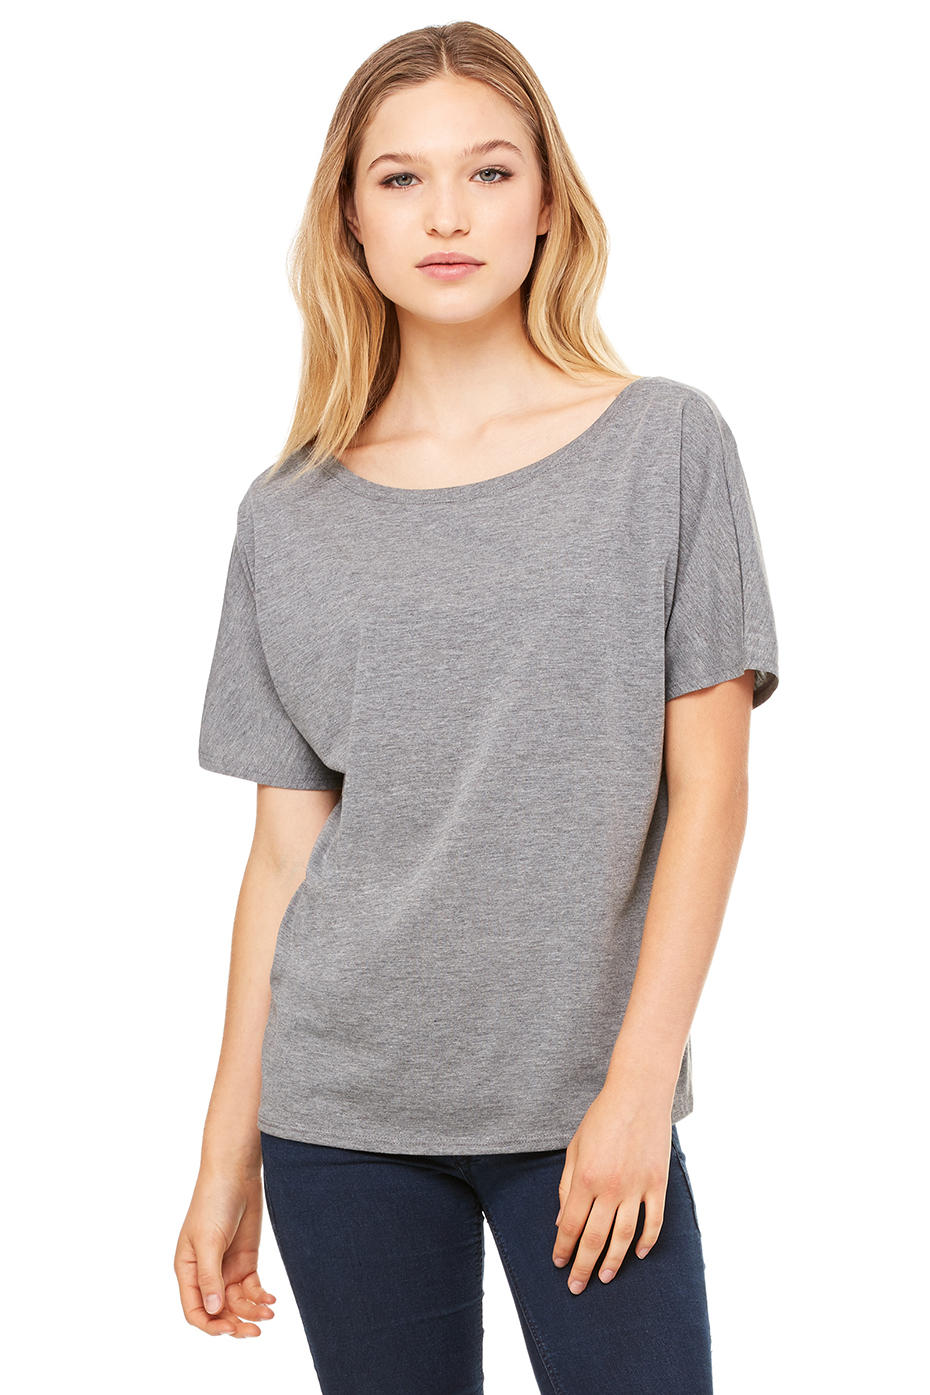 Slouchy tee project social services inc reviews live chat